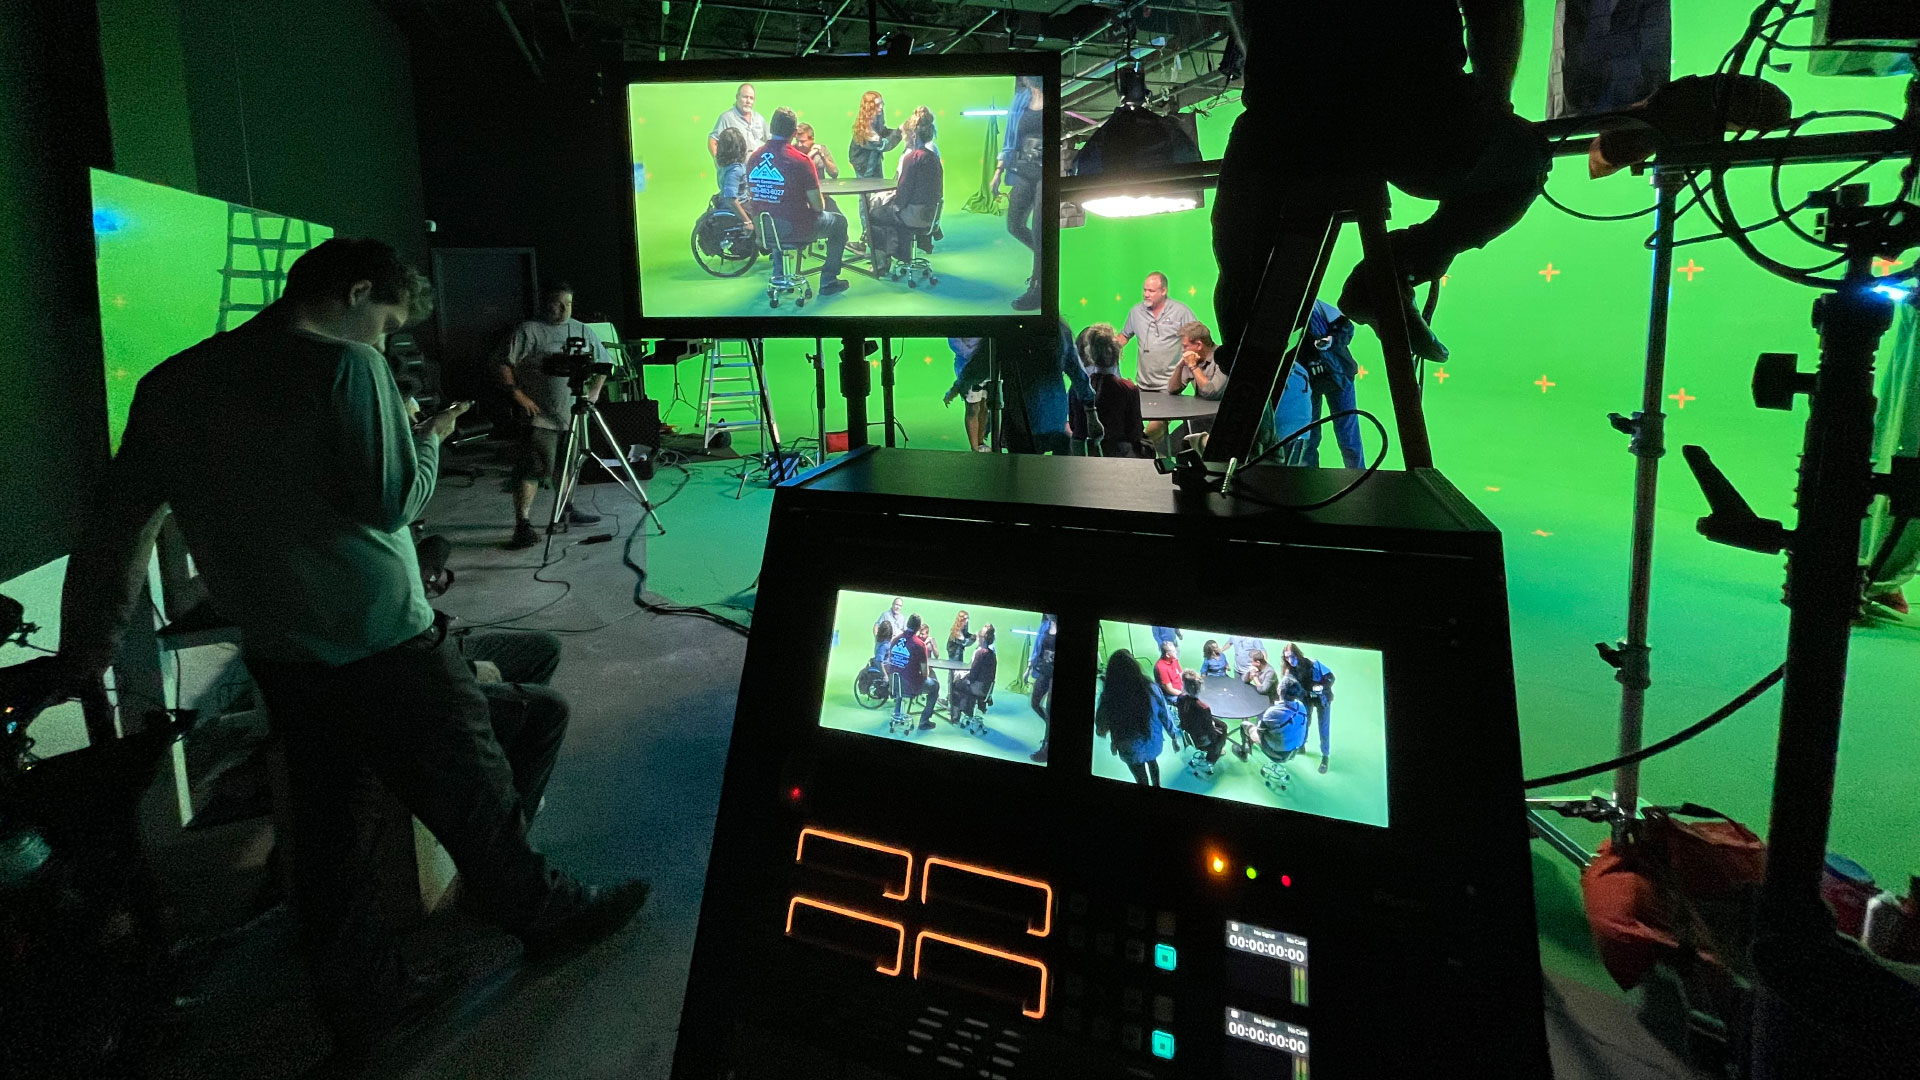 The Top 10 Reasons to Use Virtual Production for Your Next Video